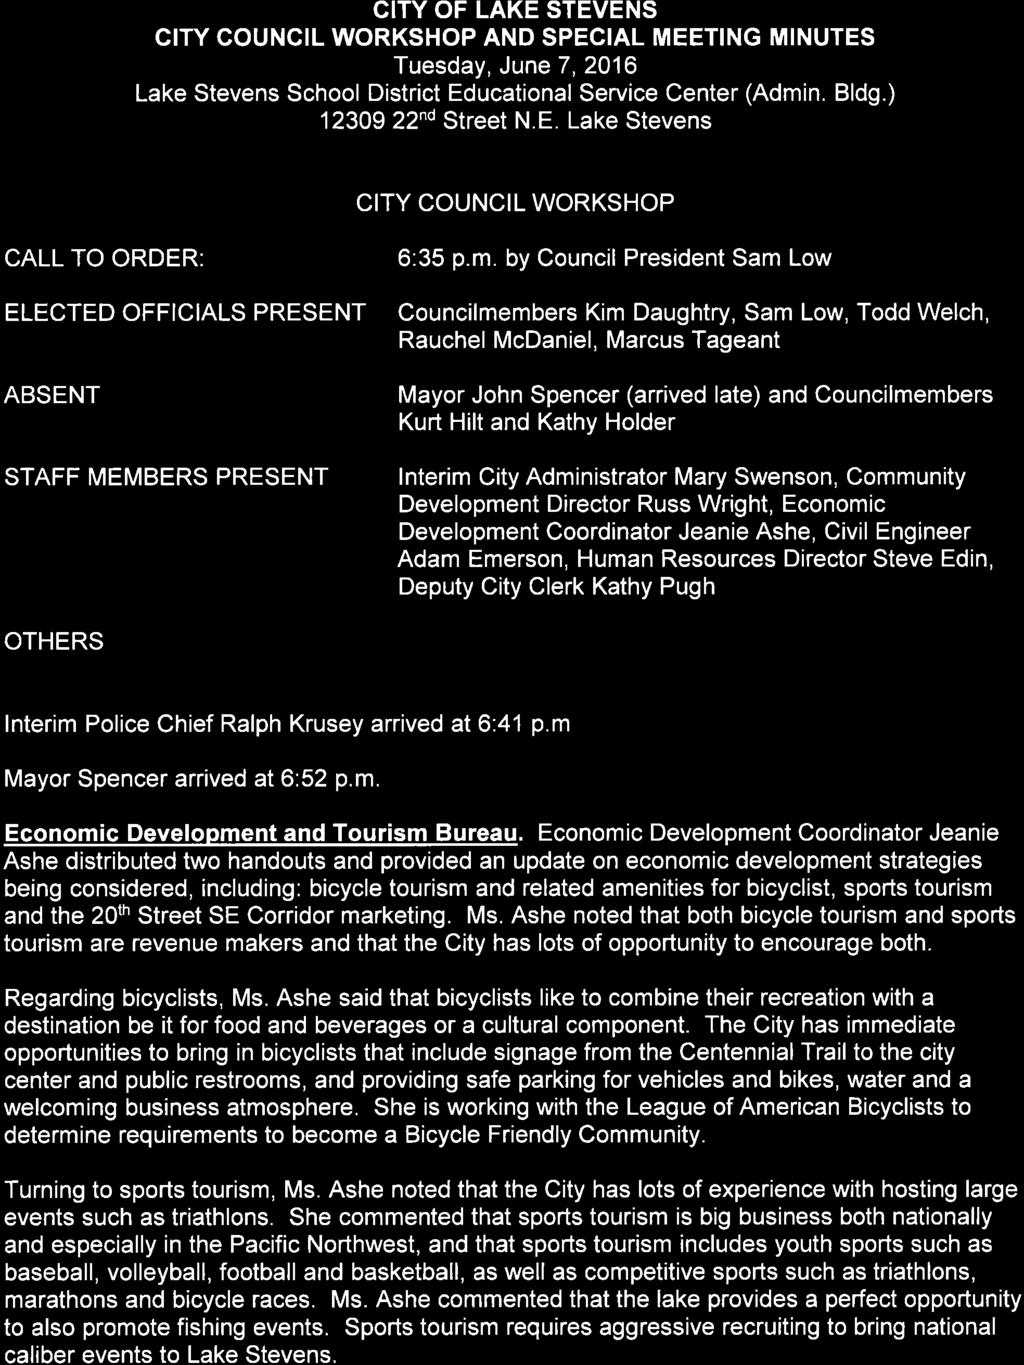 GITY OF LAKE STEVENS CITY COUNCIL WORKSHOP AND SPECIAL MEETING MINUTES Tuesday, June 7, 2016 Lake Stevens School District Educational Service Center (Admin. Bldg.) 12309 22nd Street N.E. Lake Stevens CITY COUNCIL WORKSHOP CALL TO ORDER: ELECTED OFFICIALS PRESENT ABSENT STAFF MEMBERS PRESENT 6:35 p.